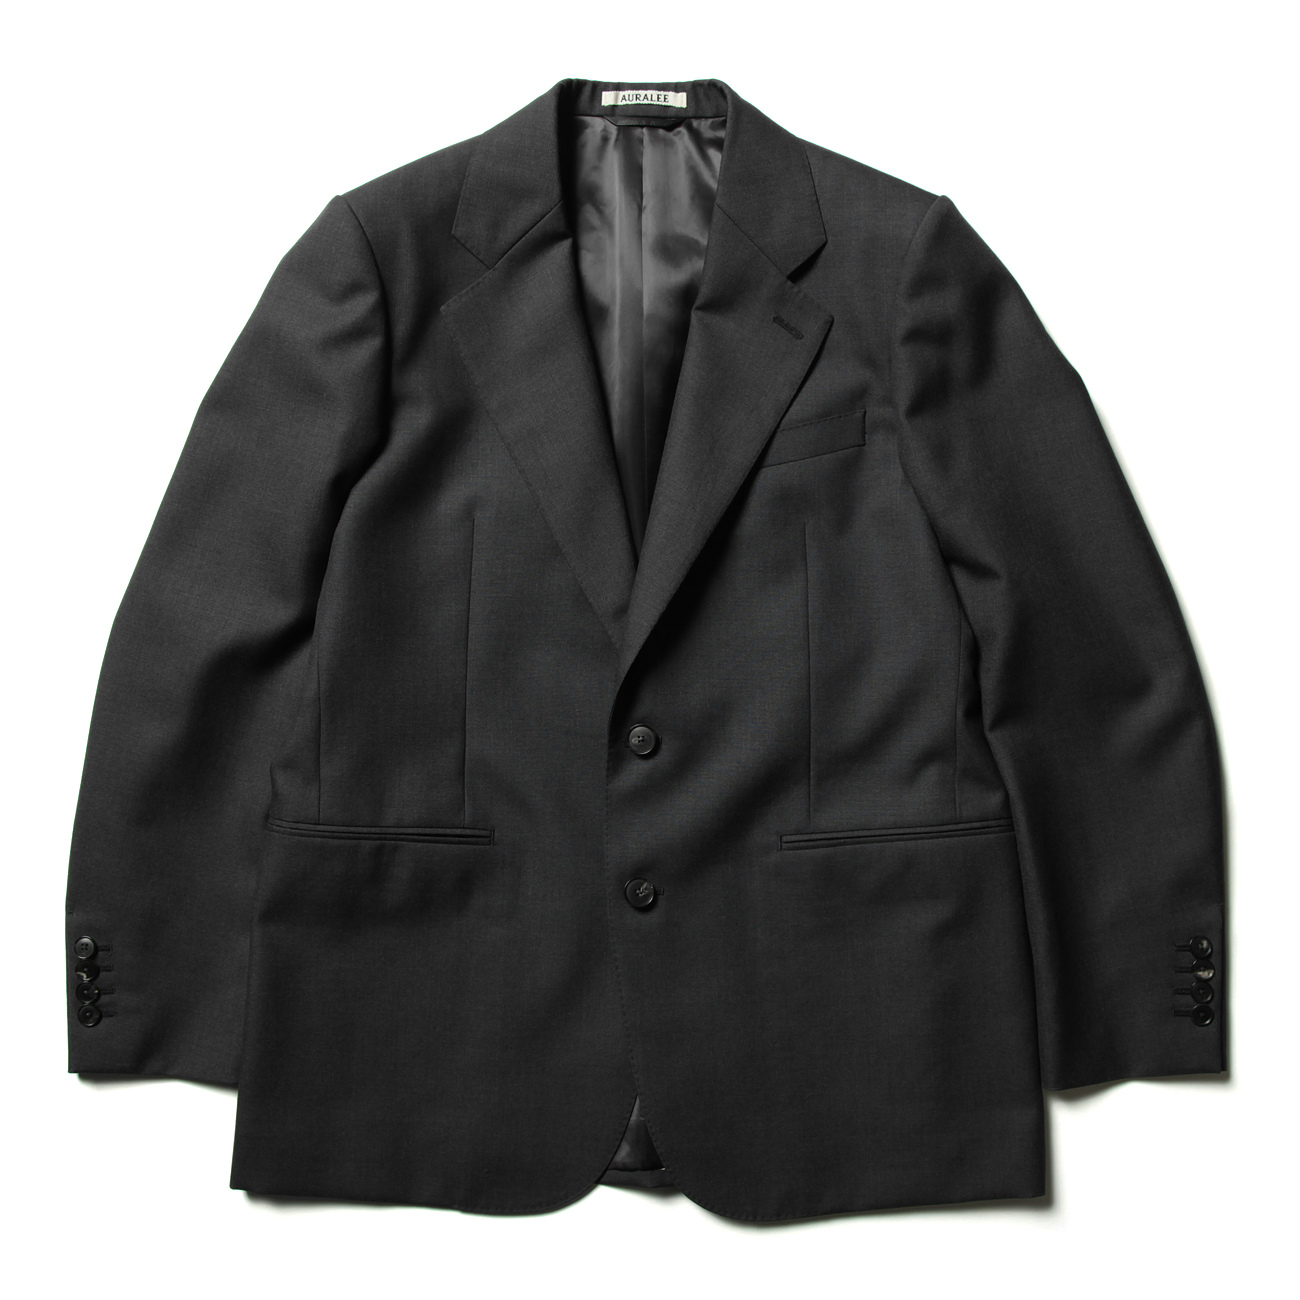 BLUEFACED WOOL JACKET - Top Charcoal